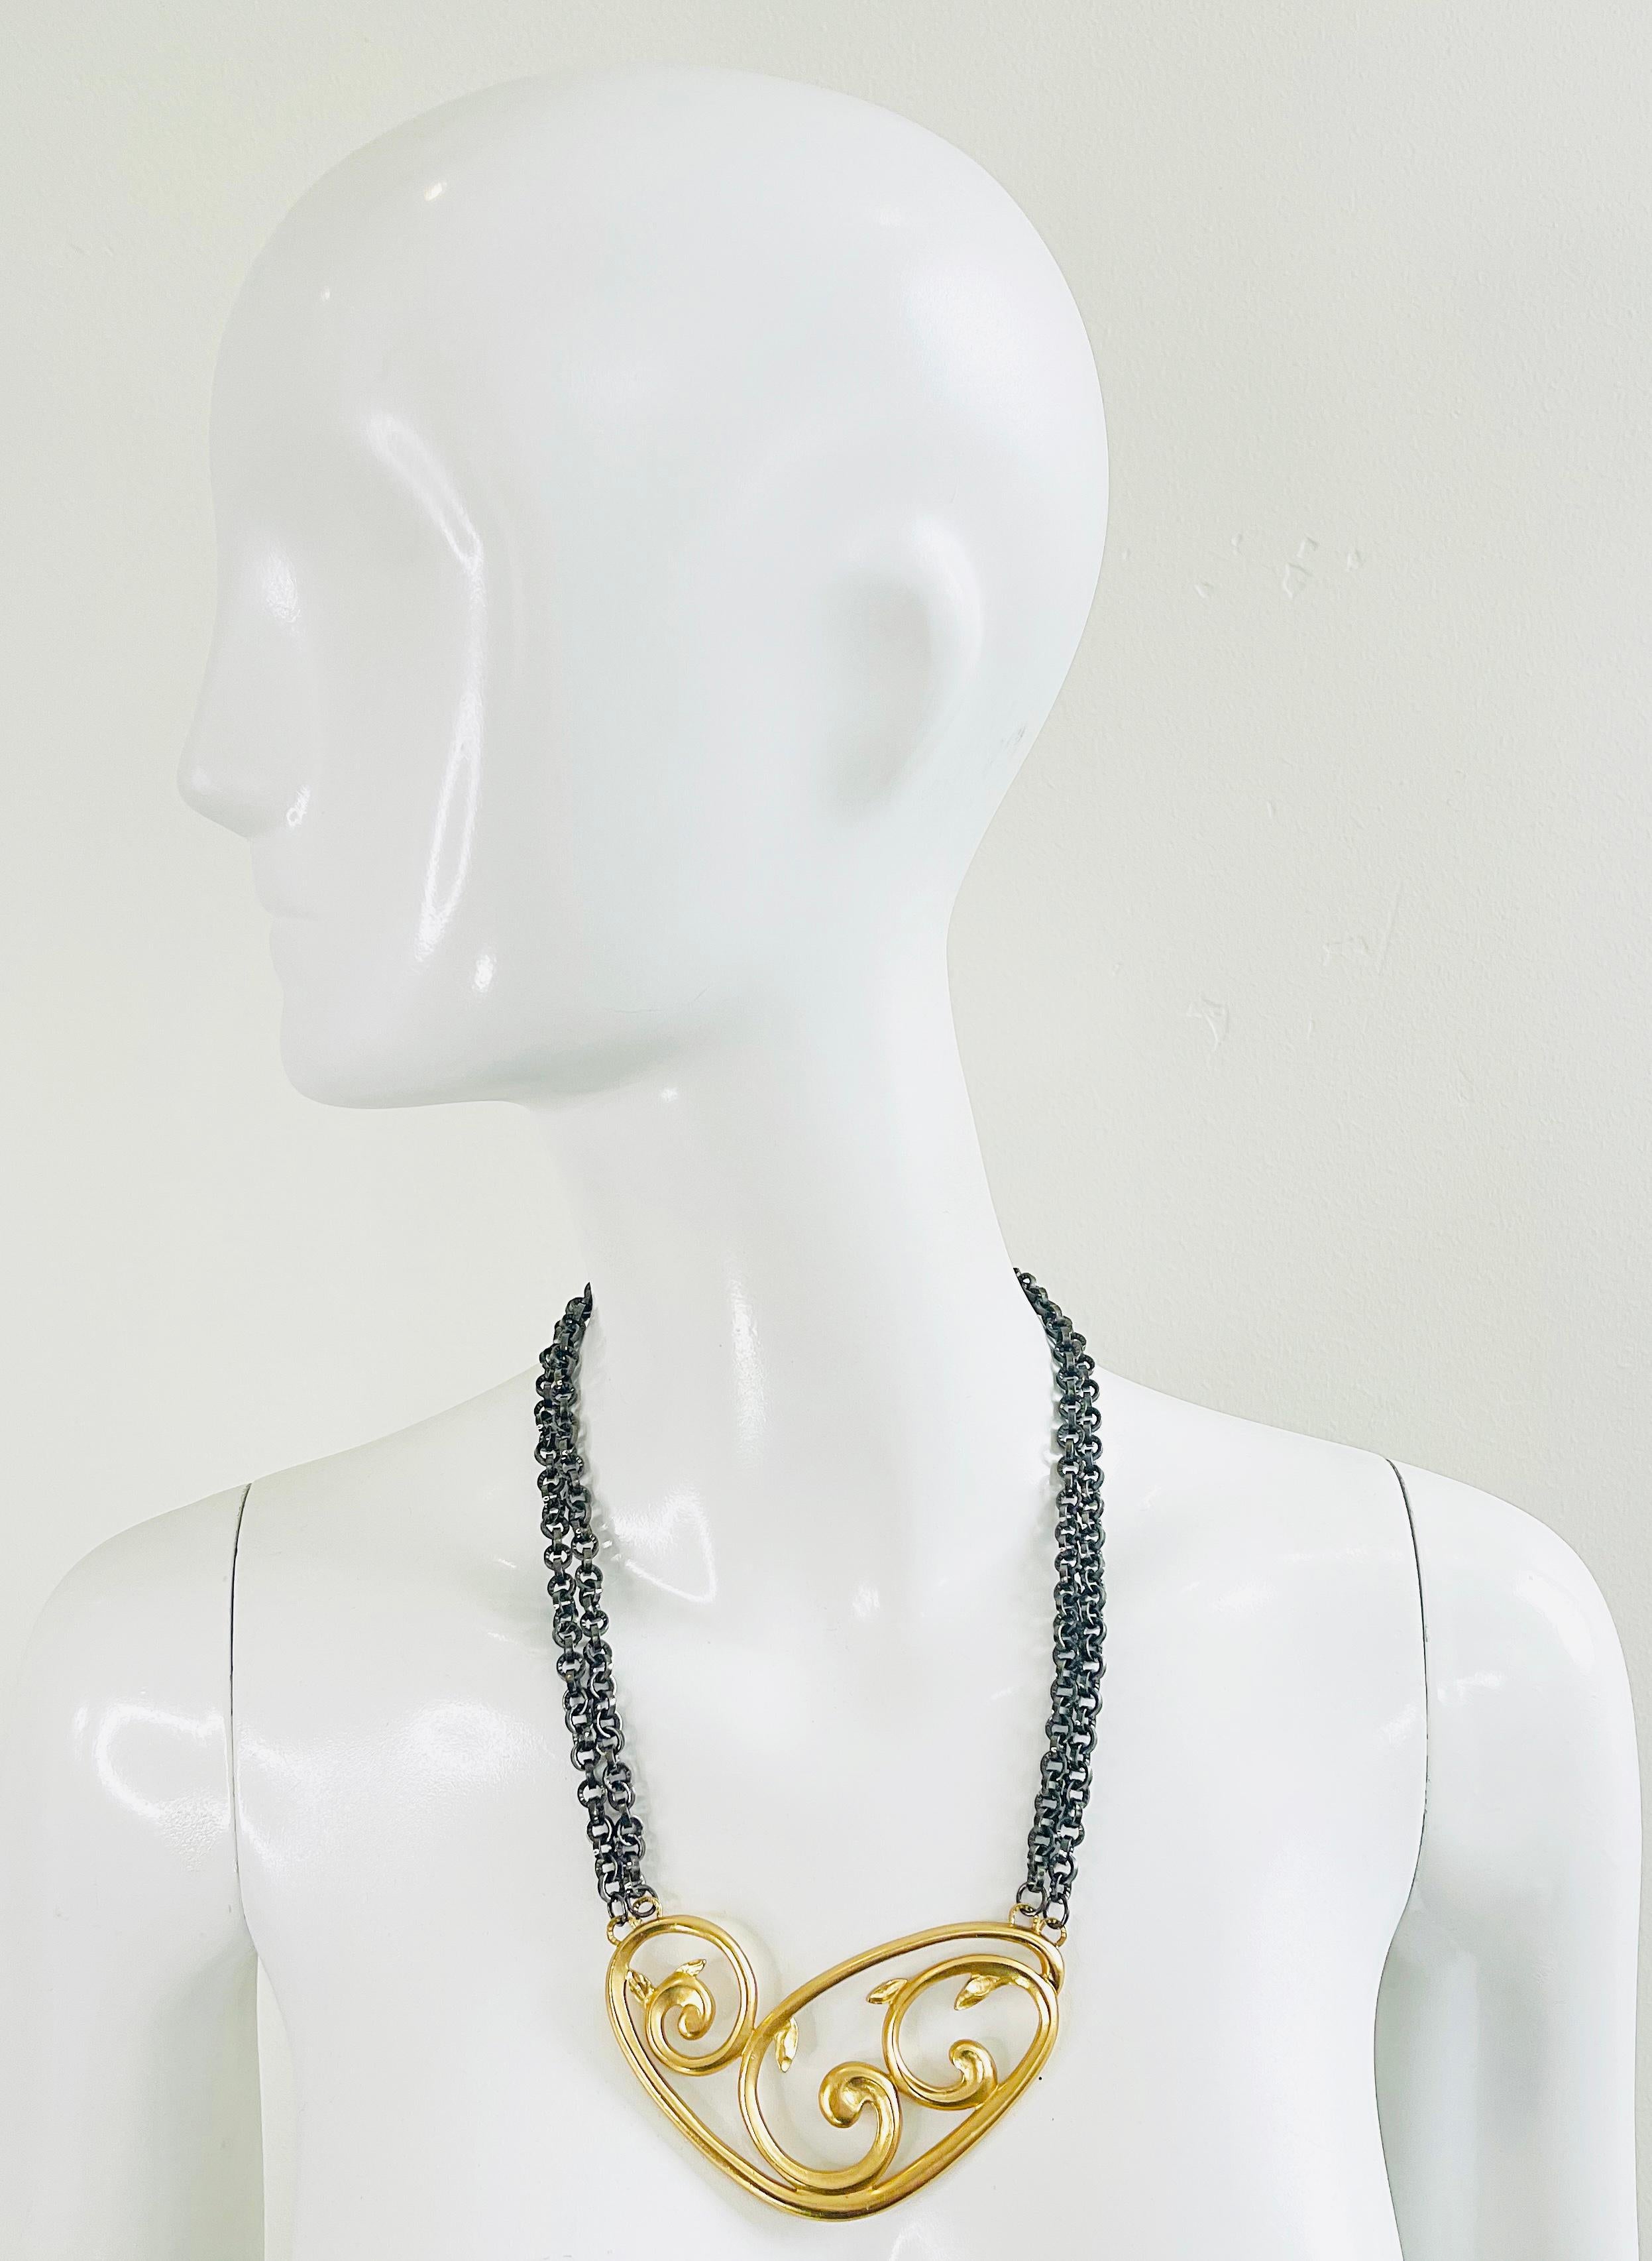 Limited Edition 80s vintage YVES SAINT LAURENT by ROBERT GOOSSENS gilded vermeil gold and gunmetal scroll necklace. This YSL beauty is numbered 105/500, meaning that only 500 were produced. Two gunmetal silver chains with clasp closure. 
Can easily